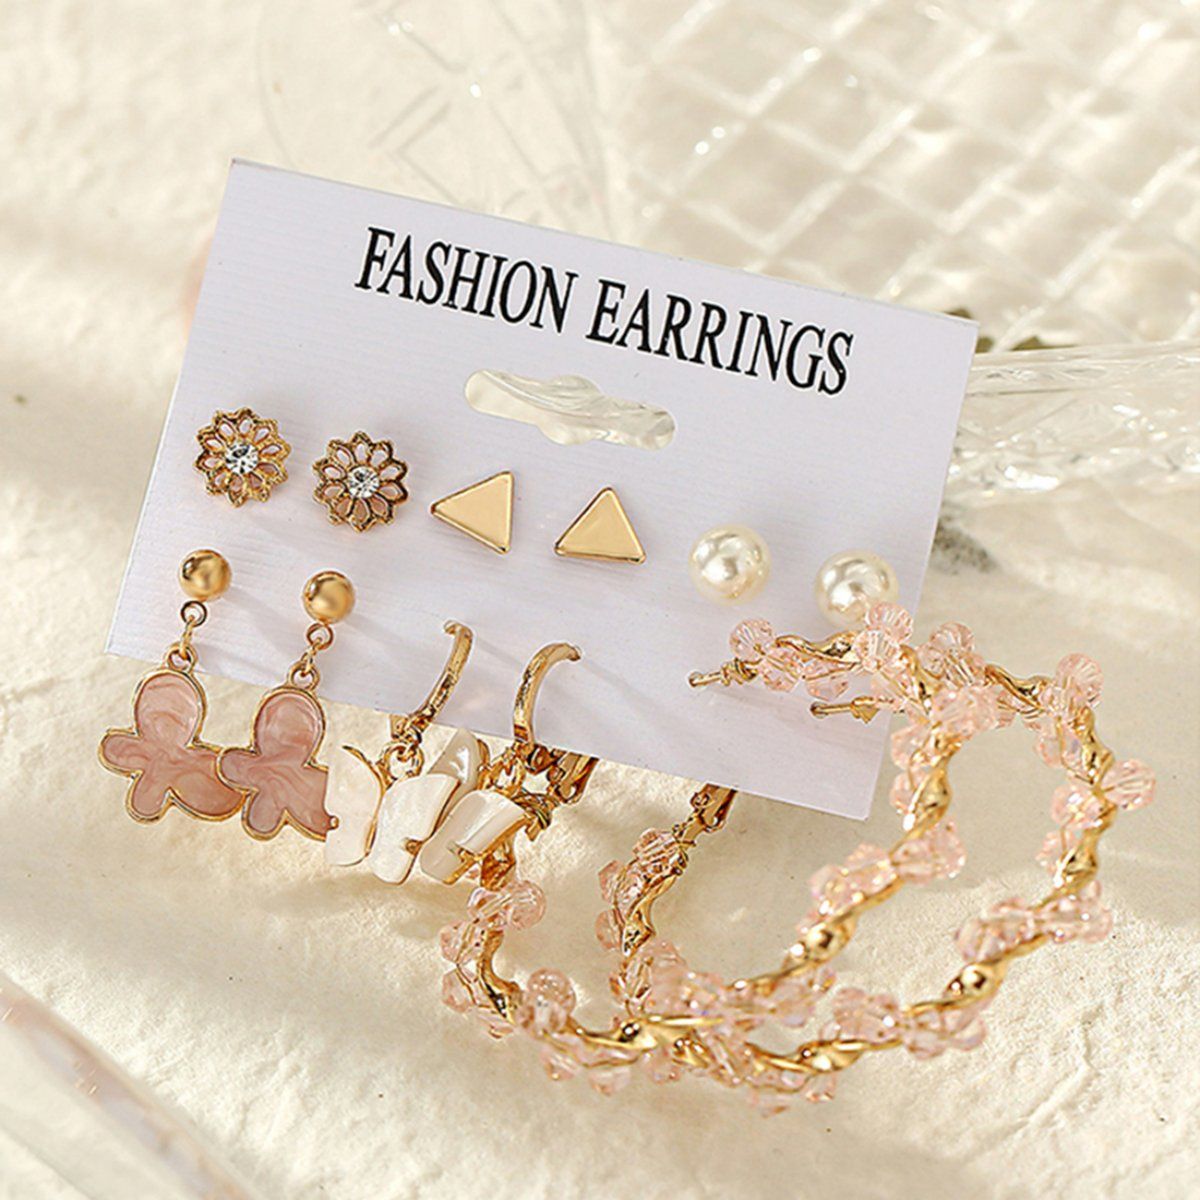 Accessorize London Girls Unicorn Stick On Earrings Set Buy Accessorize  London Girls Unicorn Stick On Earrings Set Online at Best Price in India   Nykaa